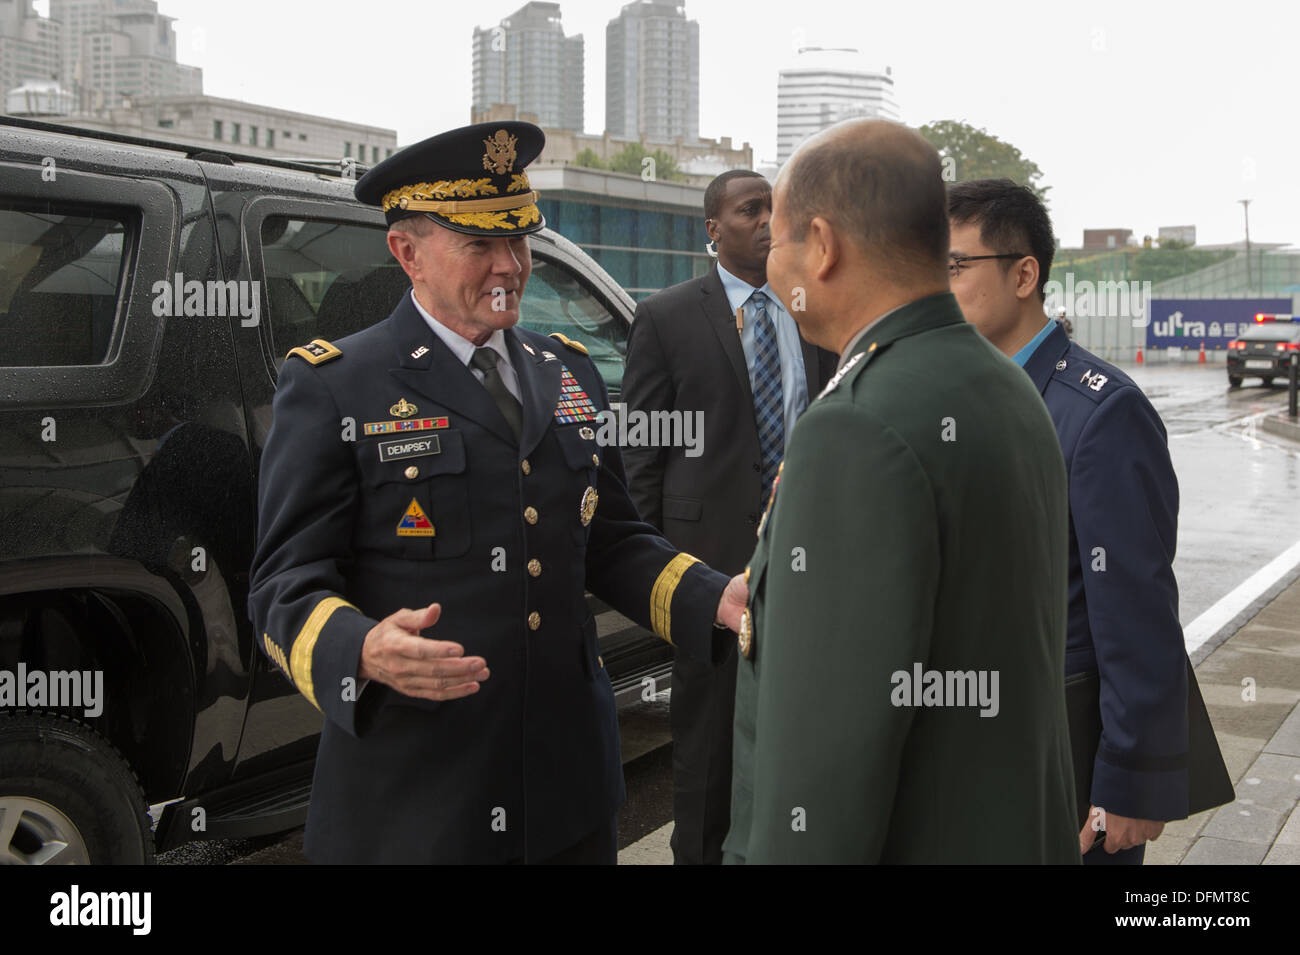 Chairman of the Joint Chiefs of Staff Gen. Martin E. Dempsey is greeted by his South Korean counterpart Gen. Jung Seung Jo during an office call in Seoul, South Korea Sept. 30, 2013. Dempsey is on a four-day trip to South Korea highlighting the strong all Stock Photo